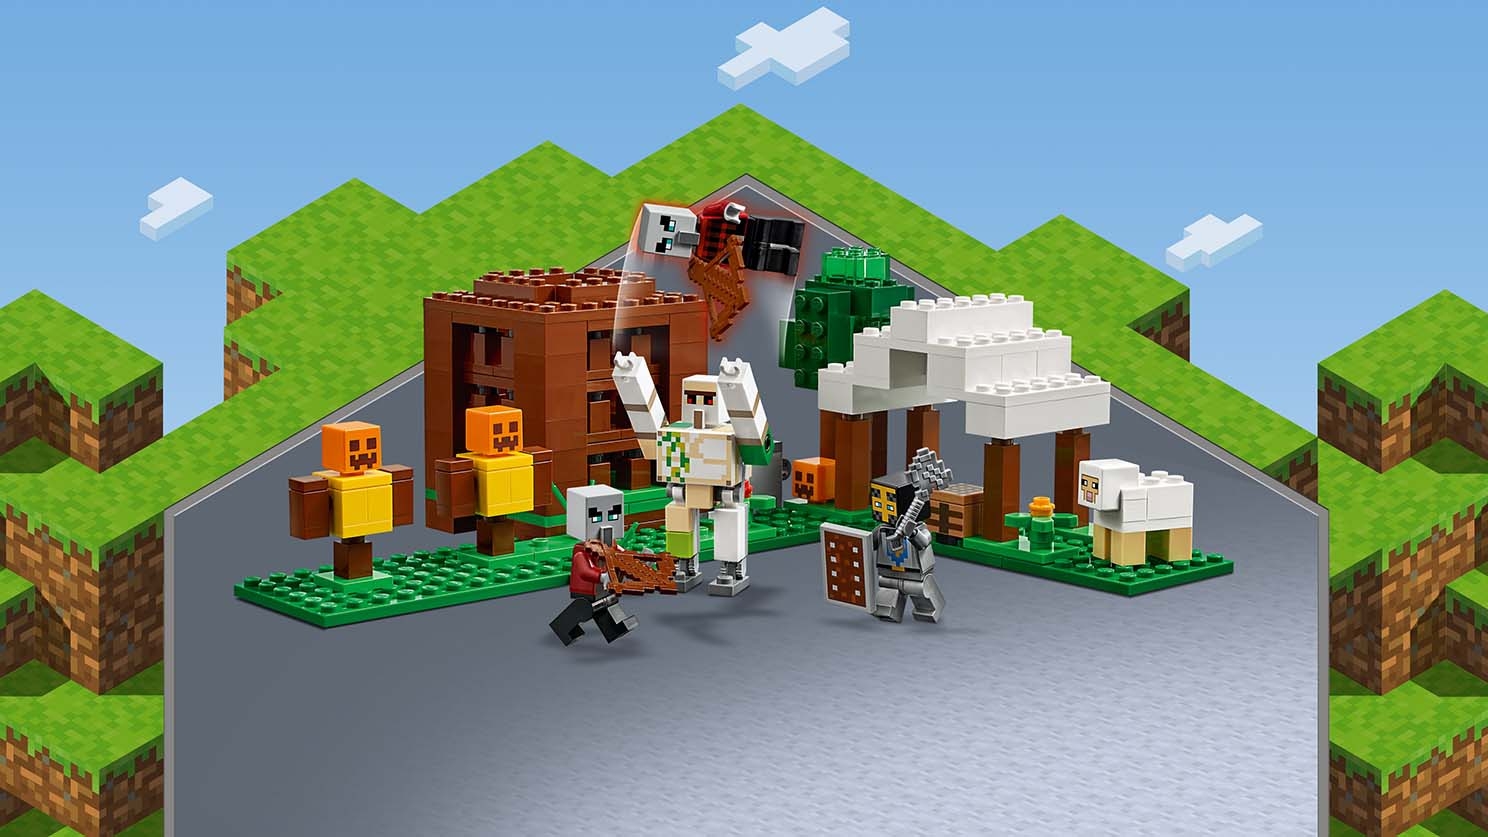 LEGO® Minecraft¿ The Pillager Outpost 21159